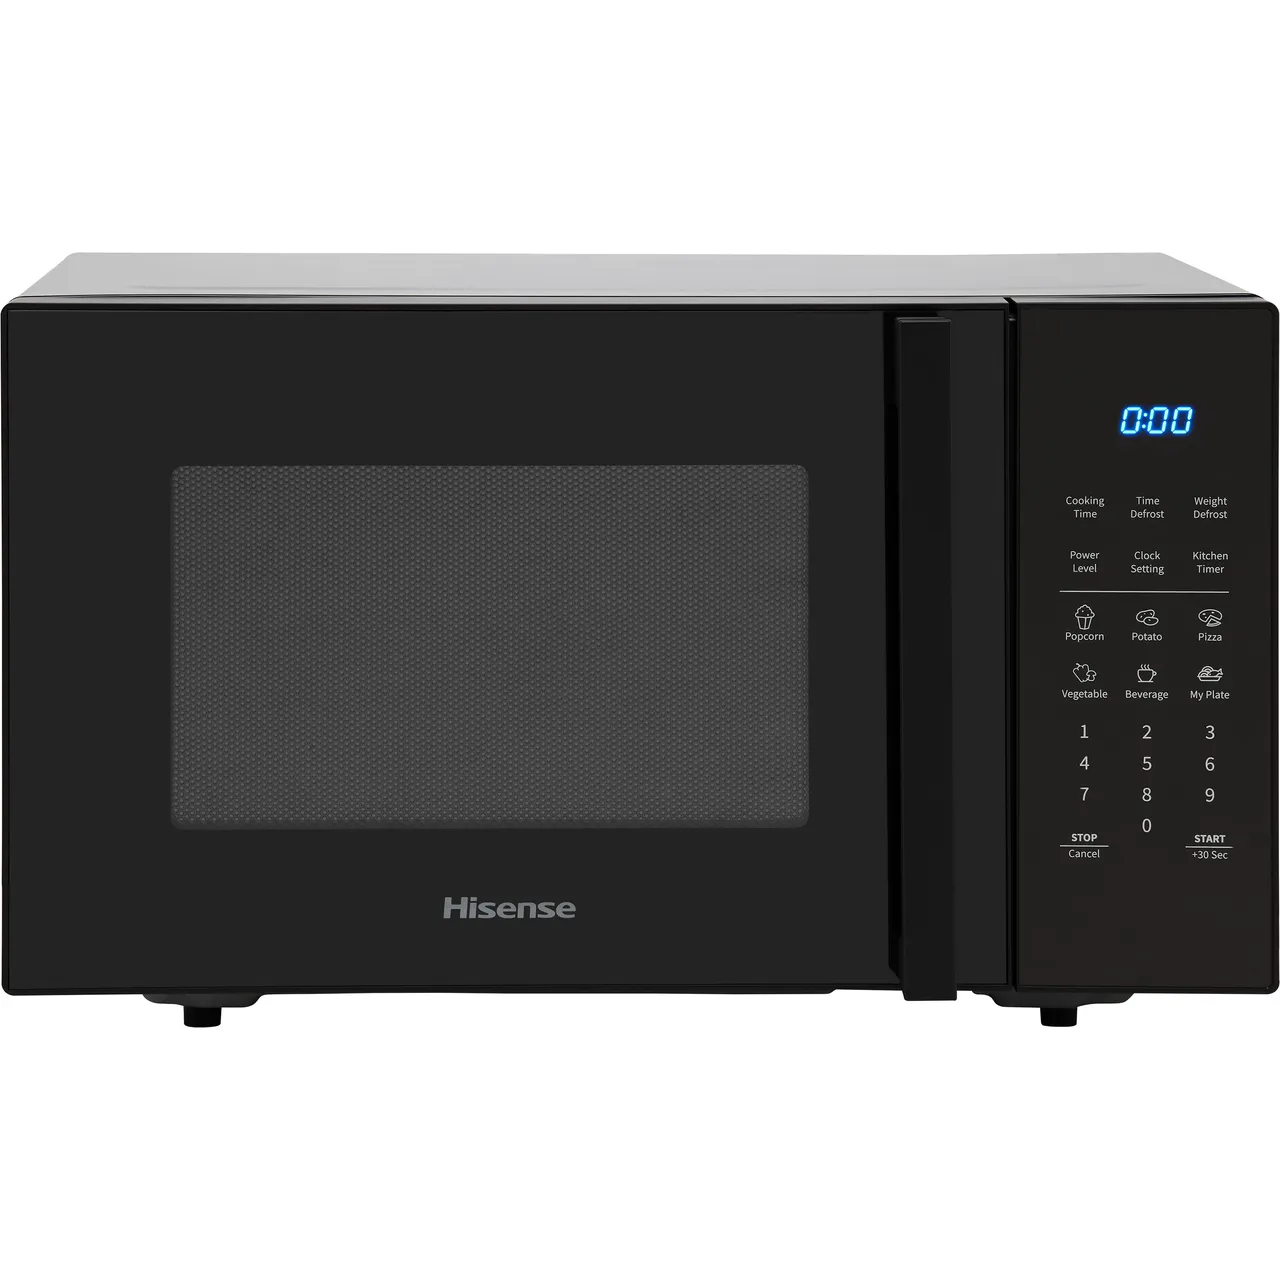 Hisense H25MOBS7HUK Free Standing Microwave Oven Black